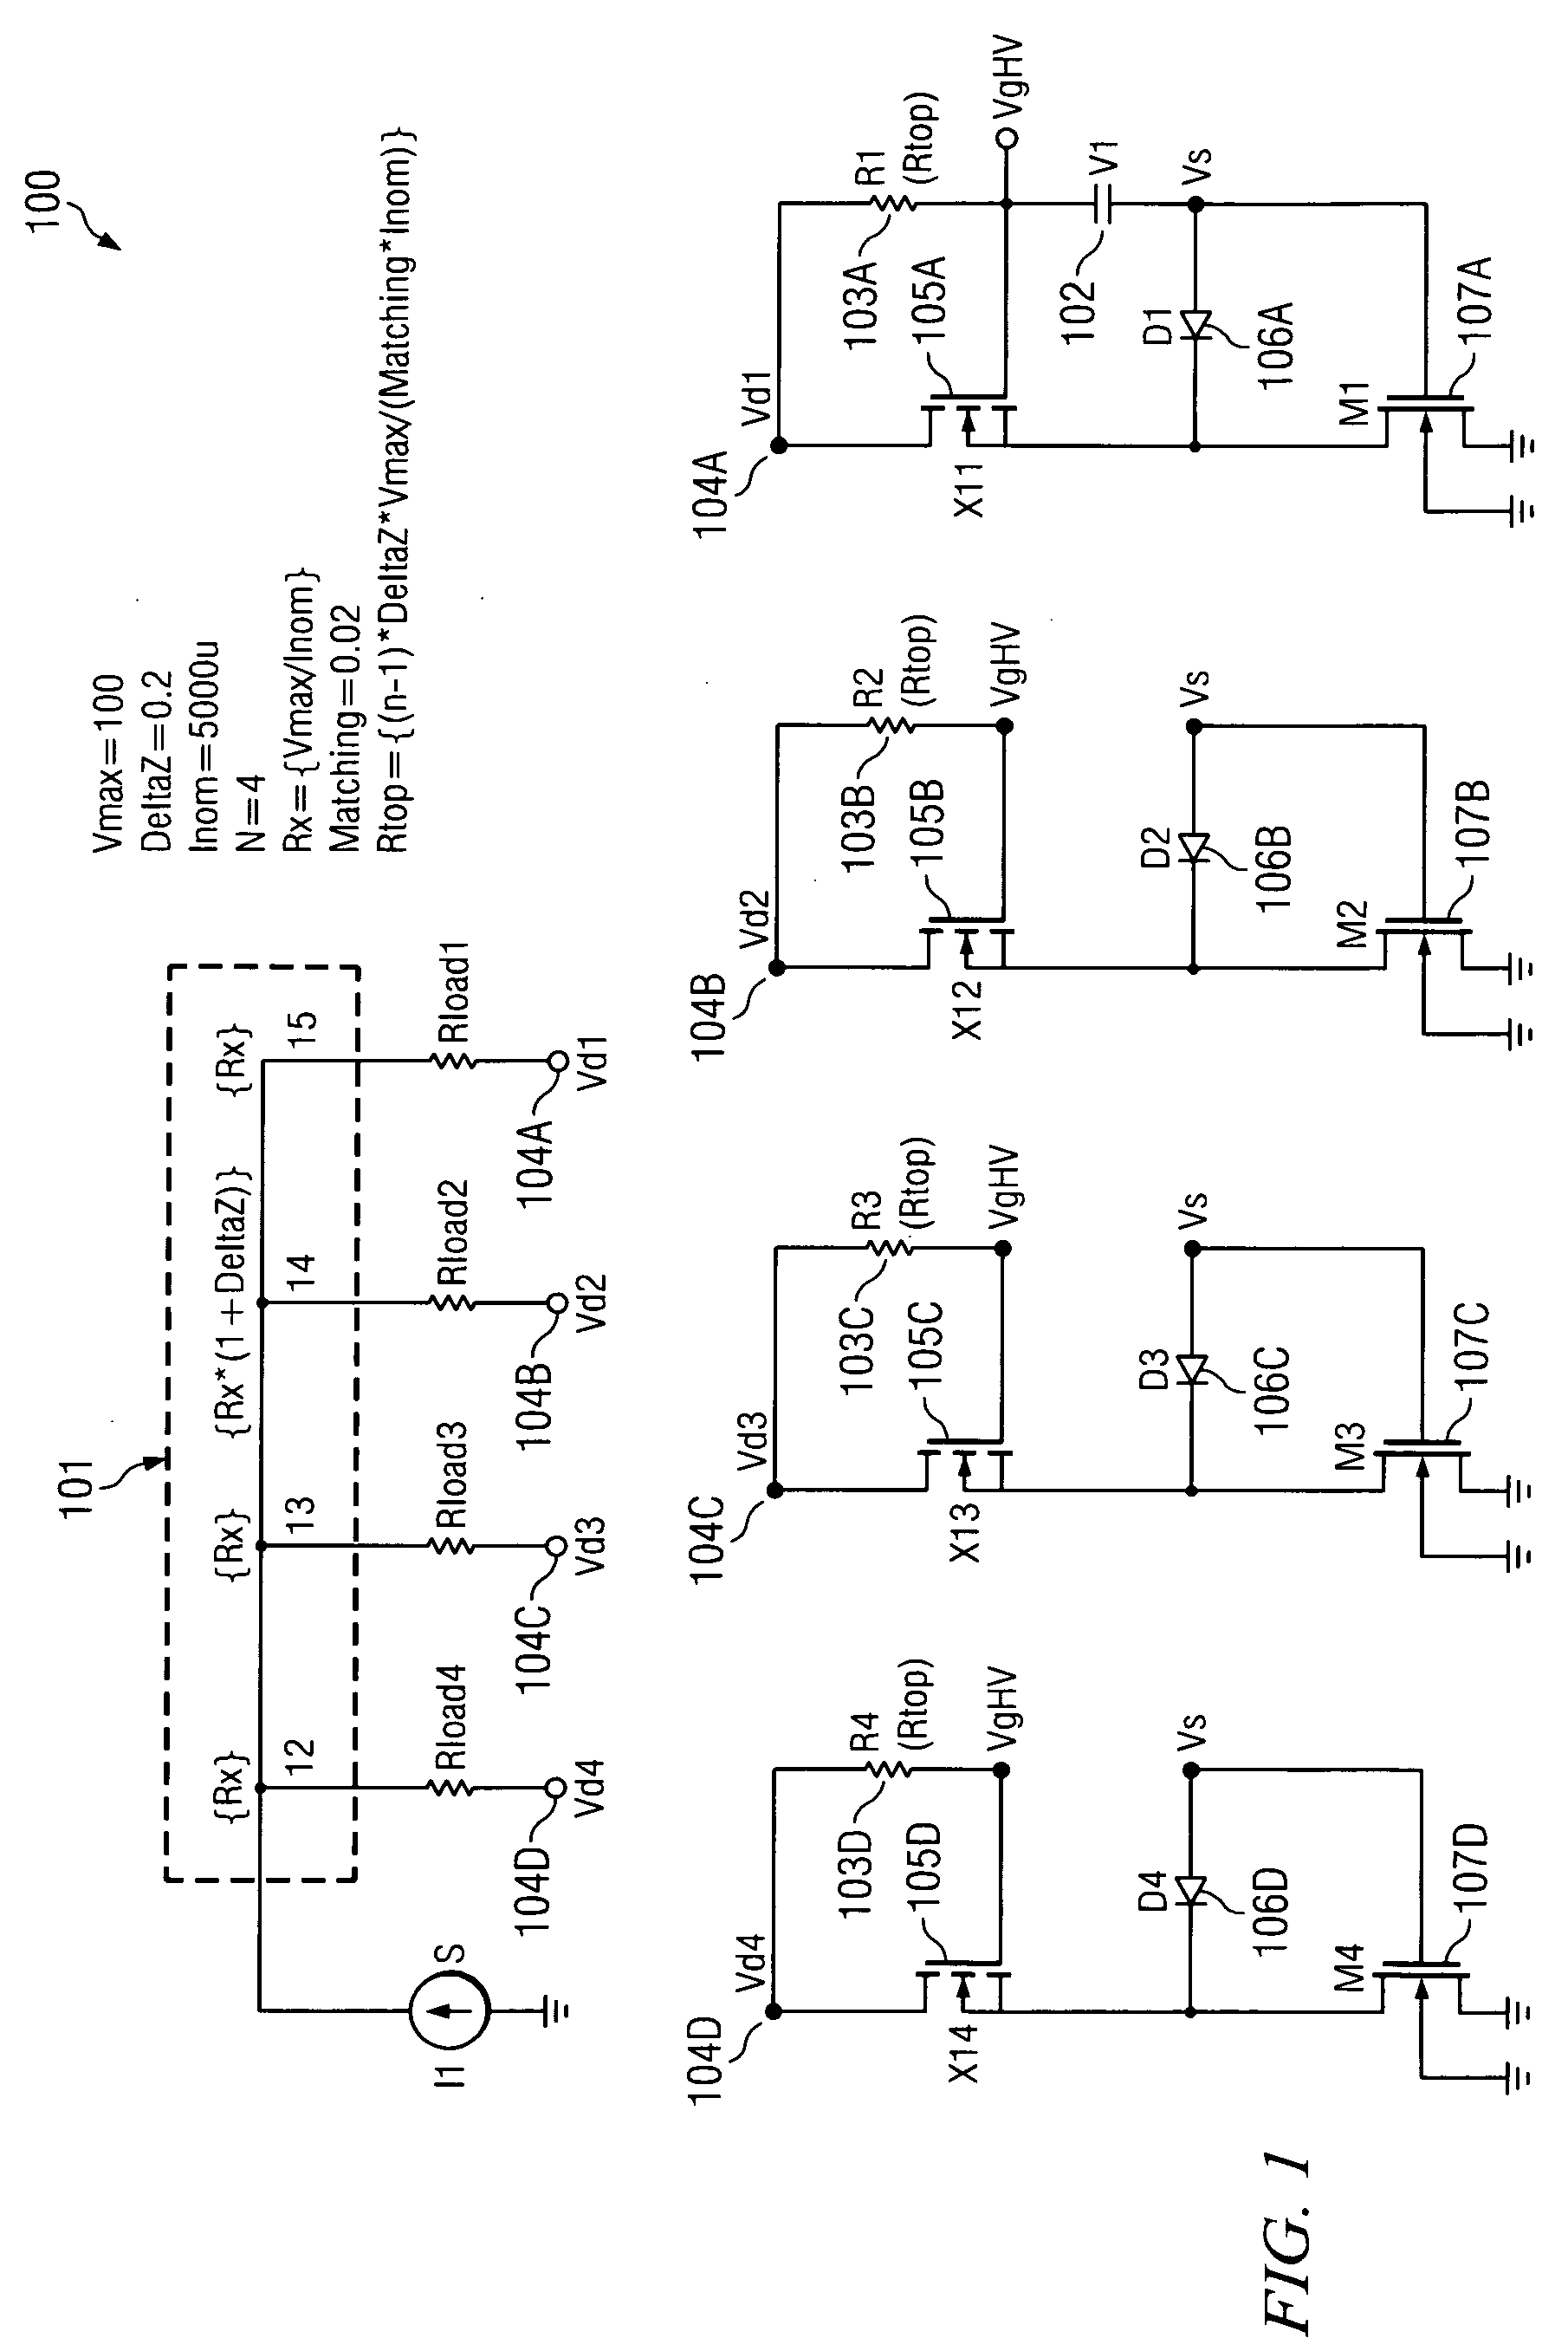 High voltage current splitter circuit and method